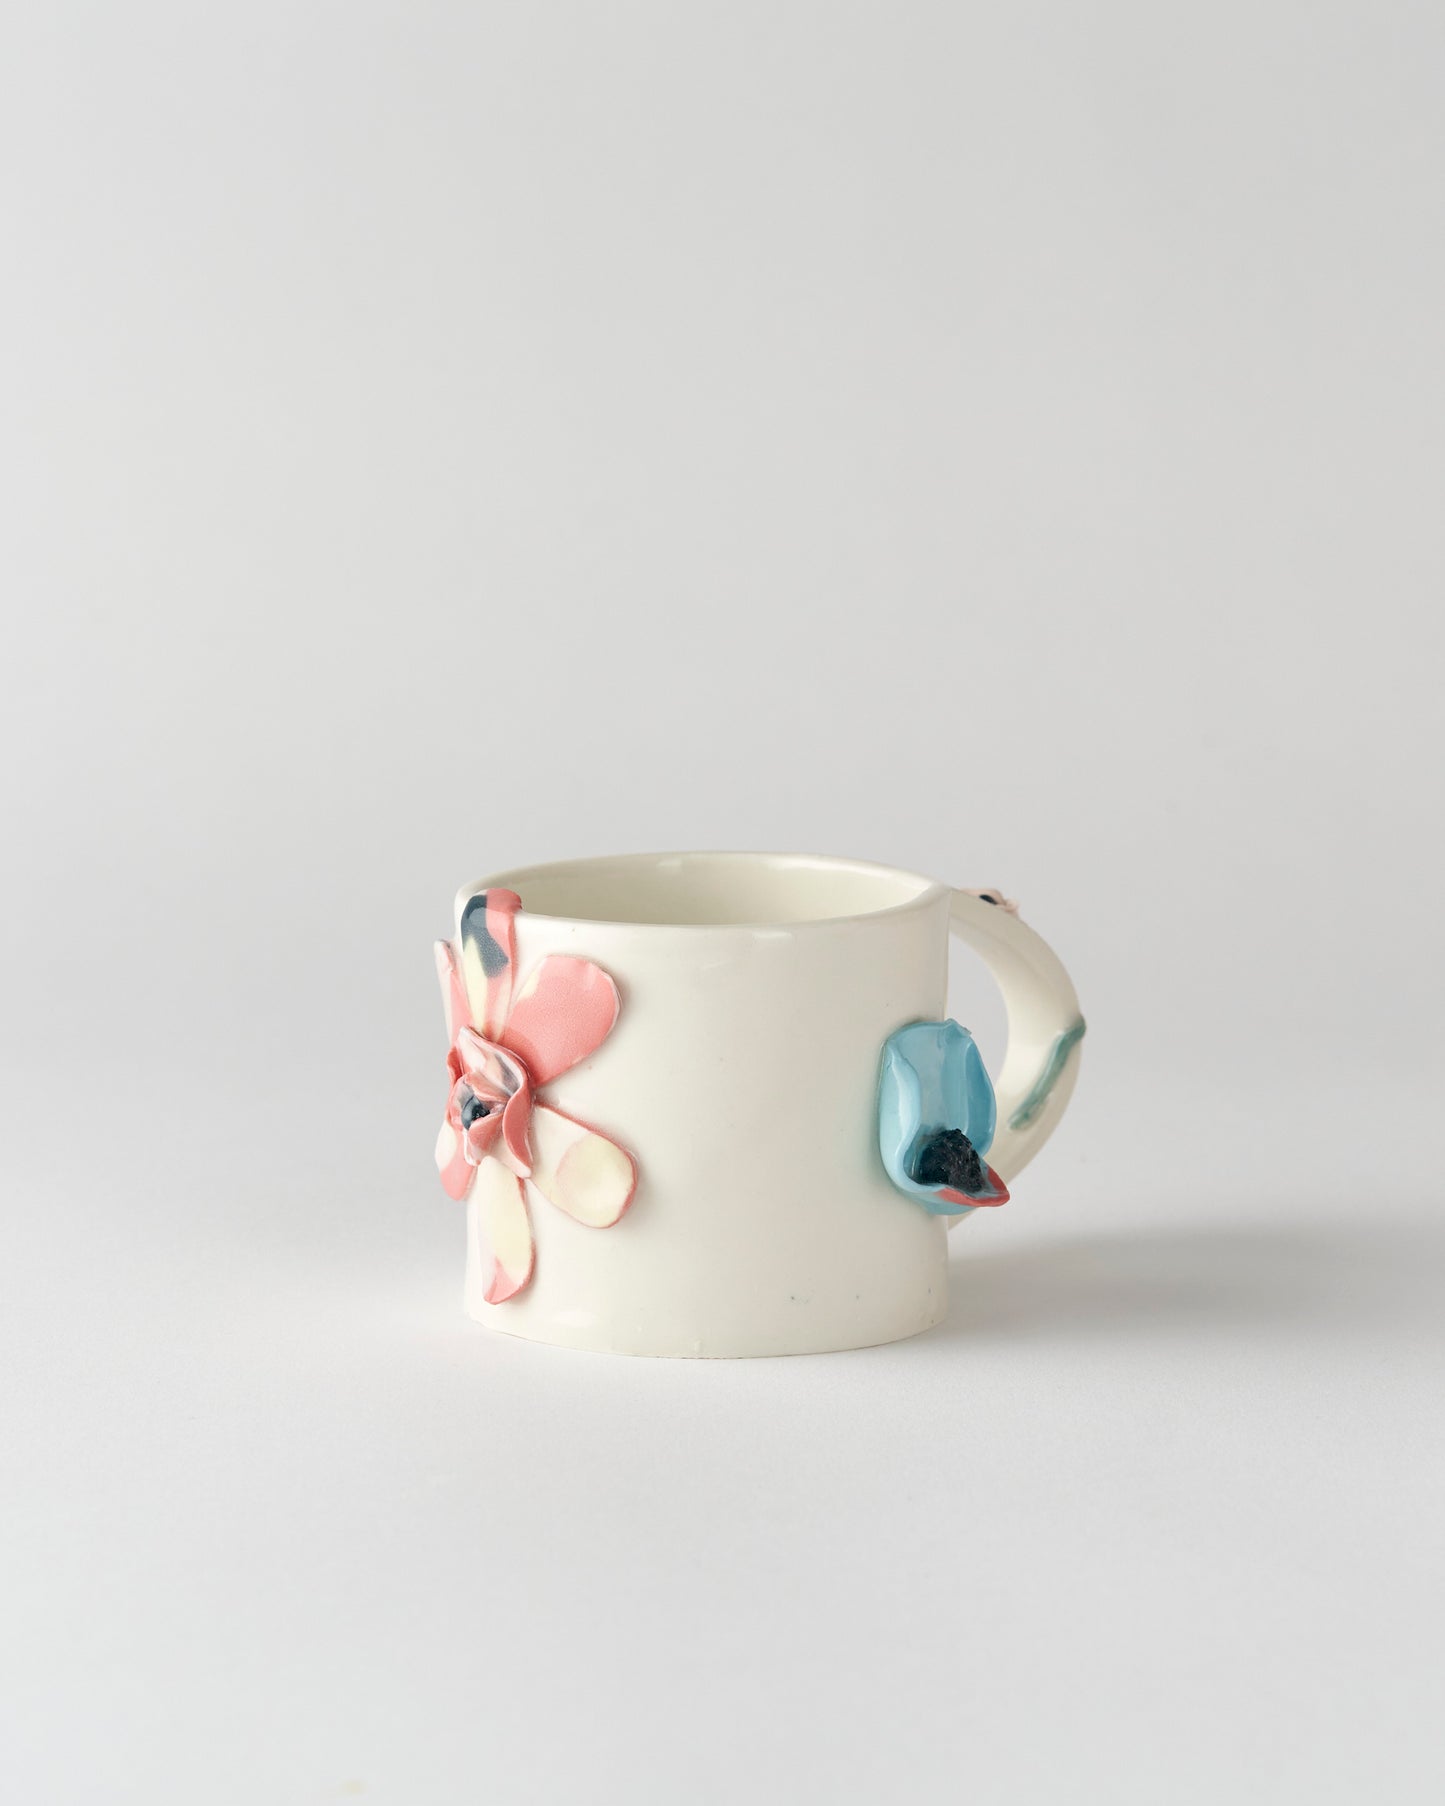 Marie Priour / Forget me not / Mug #2